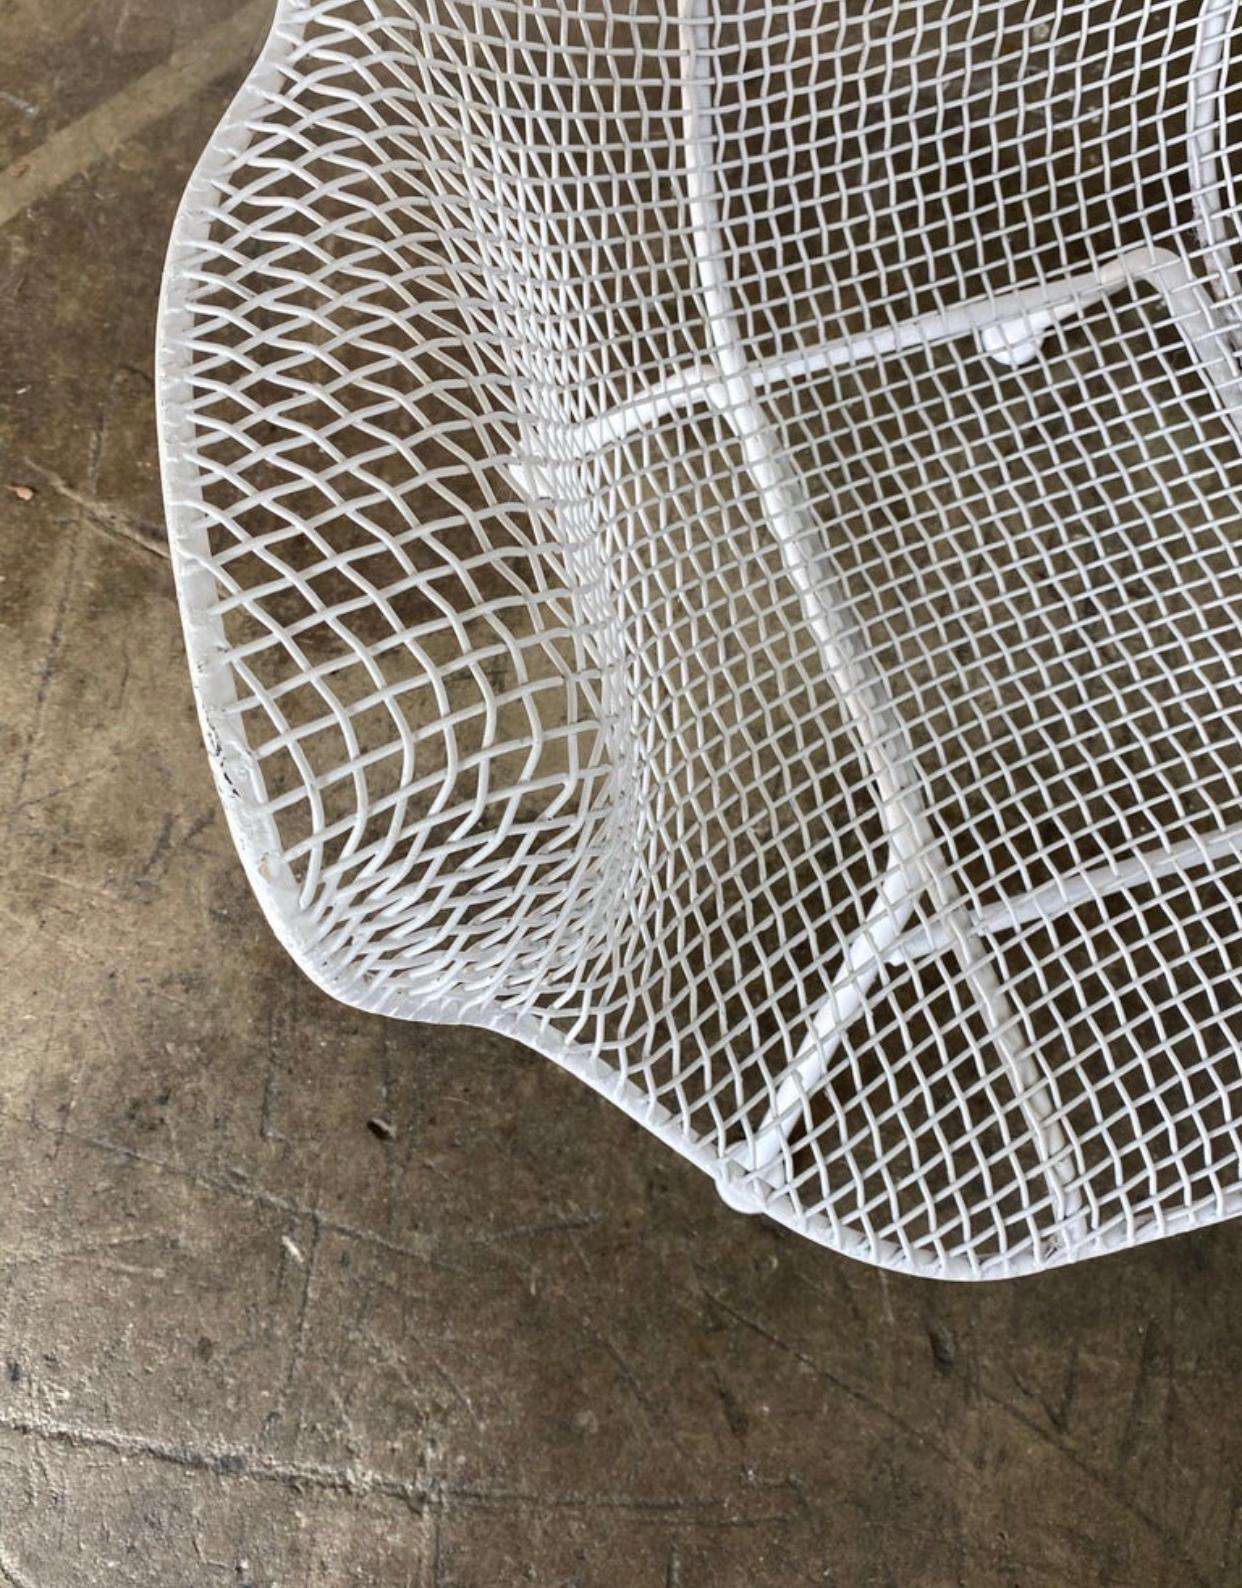 Gorgeous example of the classic Mid-Century Modern outdoor armchair, the Sculptura armchair by John Woodard. Wire seat and frame in good condition with no breaks. White paint even in good shape. Base solidly welded to the chair (unlike ersatz